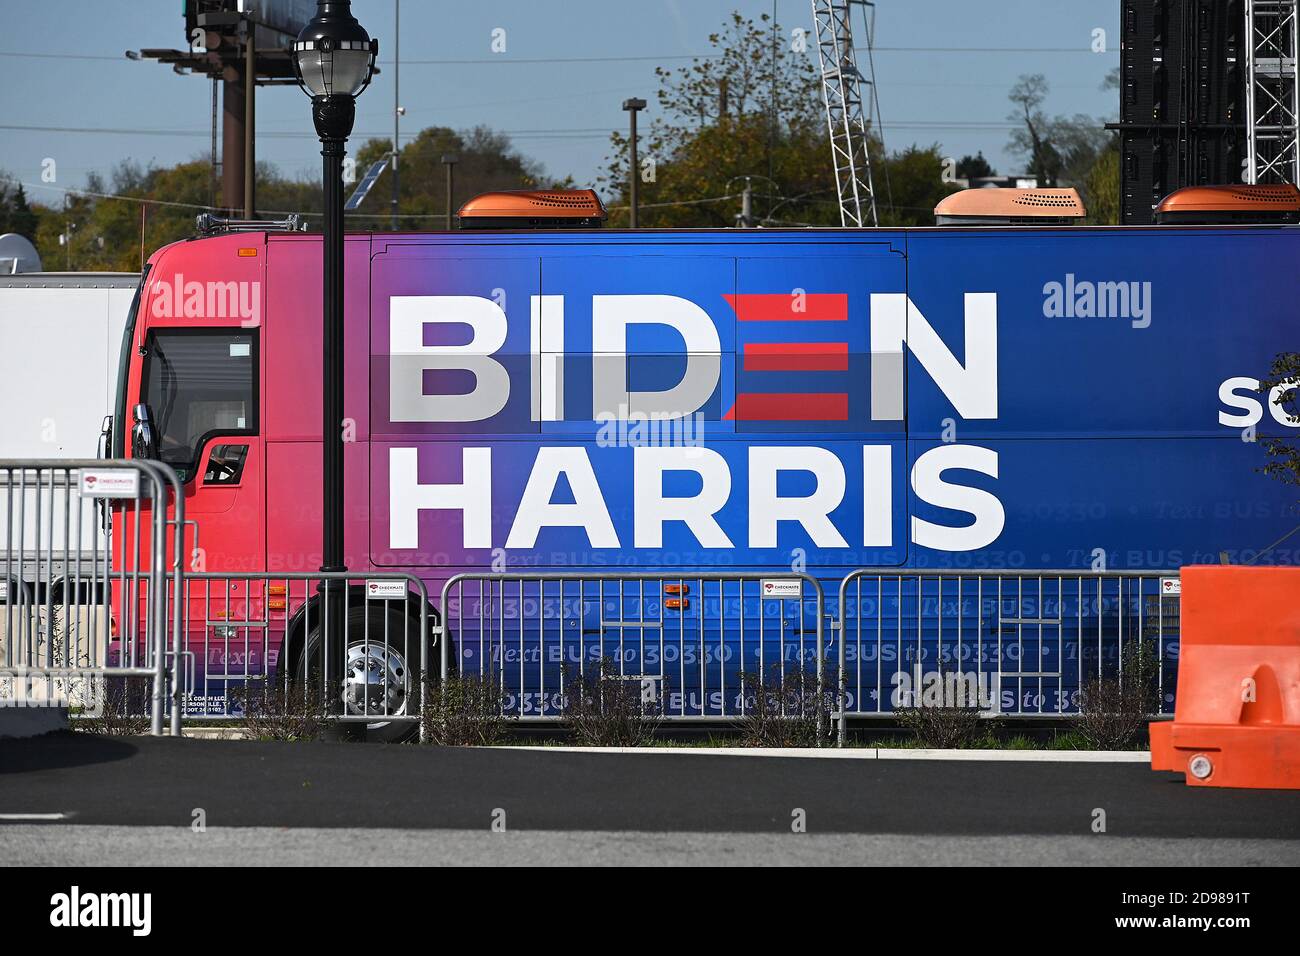 Wilmington, USA. 03rd Nov, 2020. The Biden/Harris Election bus arrives at the staging area where Democratic Presidential candidate Joe Biden is expected to speak, on this Election Day, in Wilmington, DE, November 3, 2020. Today is voting day for the 2020 U.S. Presidential election that has a Democratic ticket of former Vice President Joe Biden and his Vice President nominee Kamala Harris and a Republican ticket of incumbent President Donald J. Trump and Vice President Mike Pence.(Anthony Behar/Sipa USA) Credit: Sipa USA/Alamy Live News Stock Photo